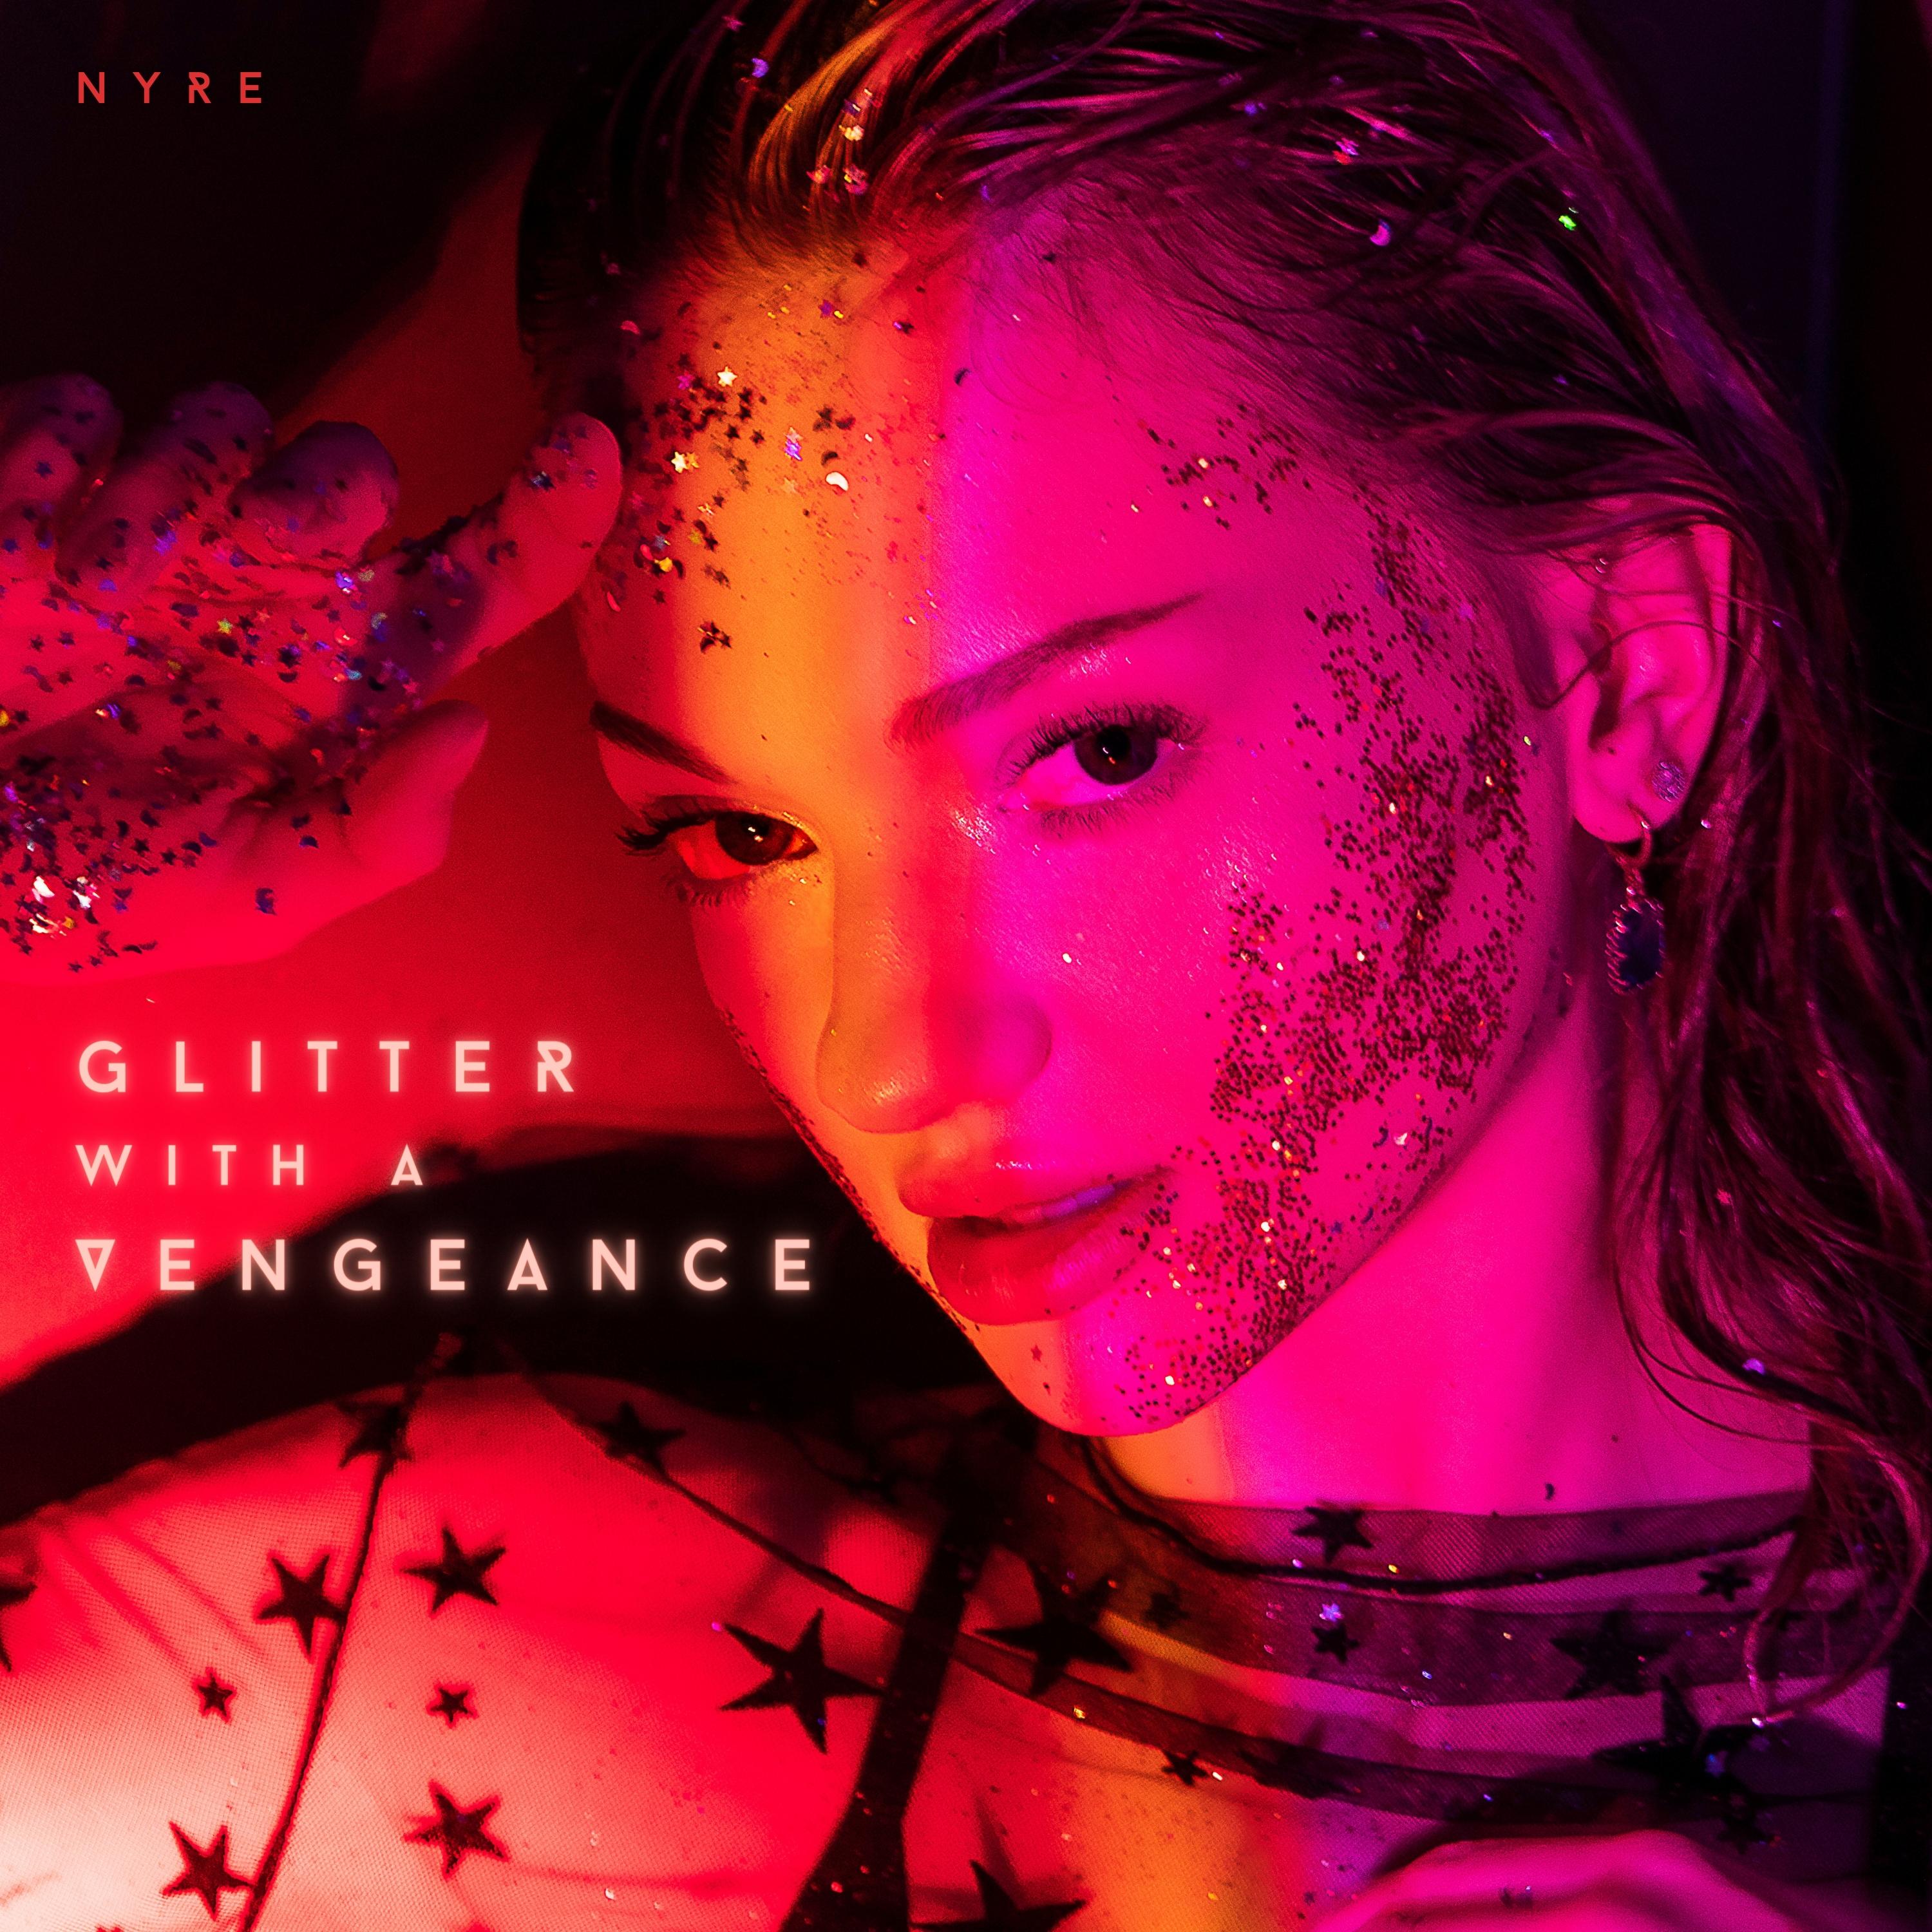 NYRE shatters the pain of a bad relationship in new single “Glitter with a Vengeance”